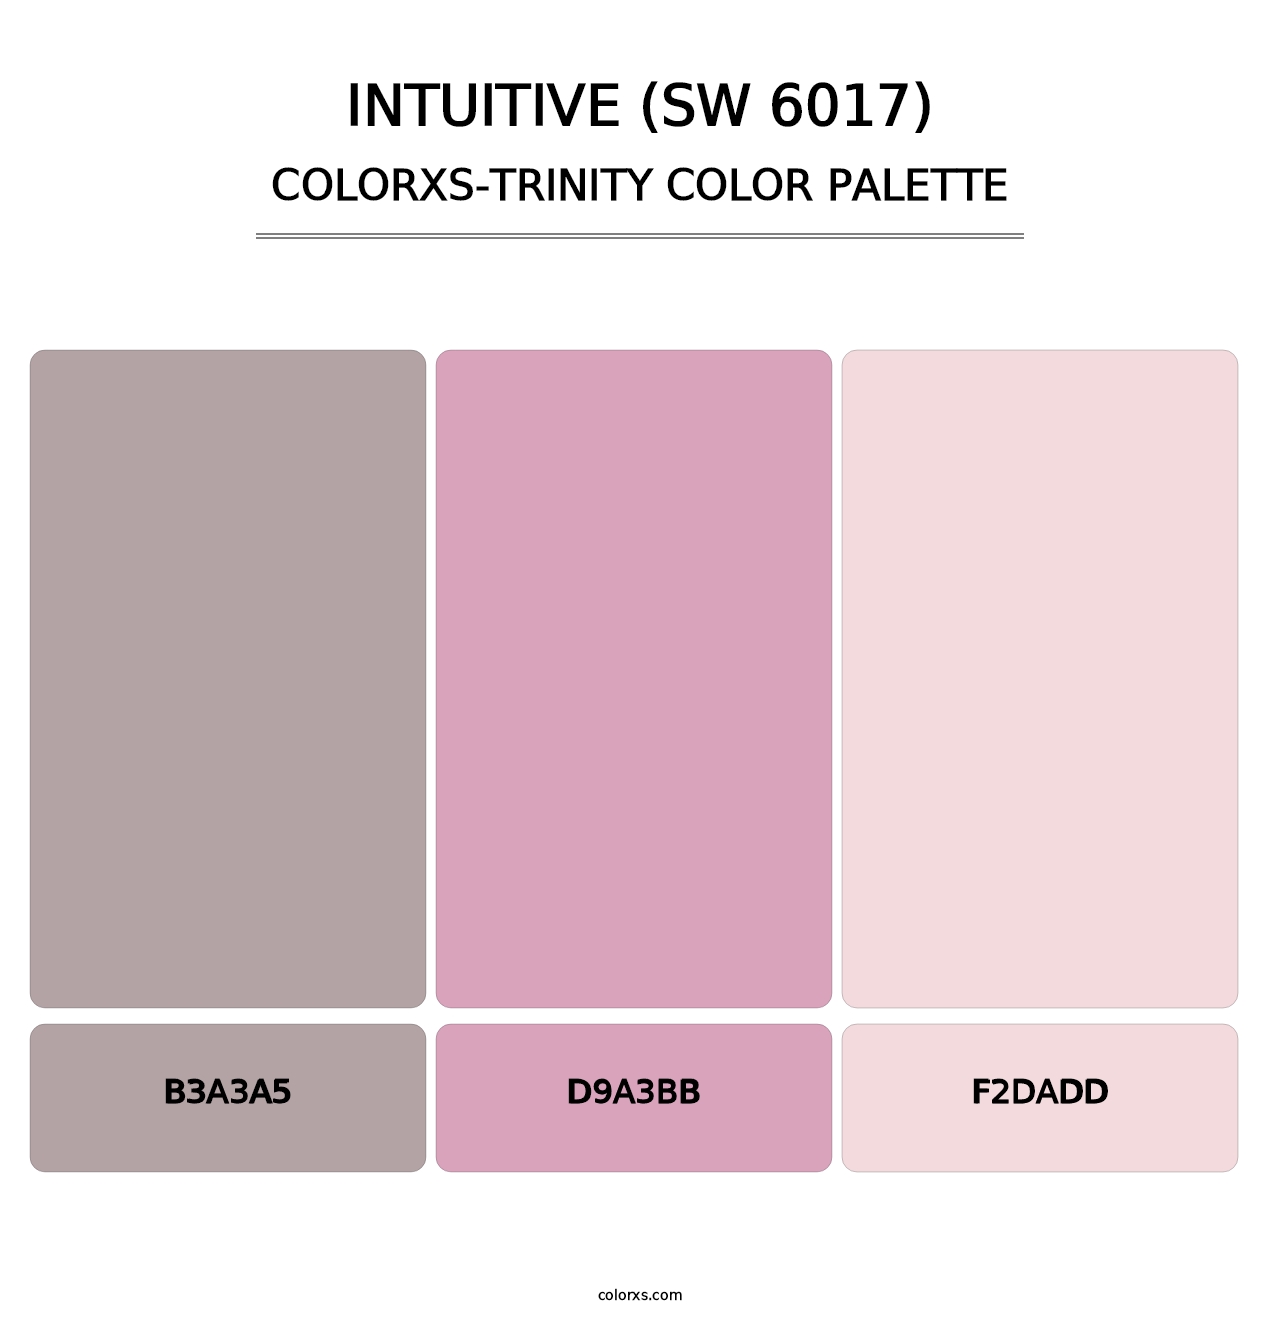 Intuitive (SW 6017) - Colorxs Trinity Palette